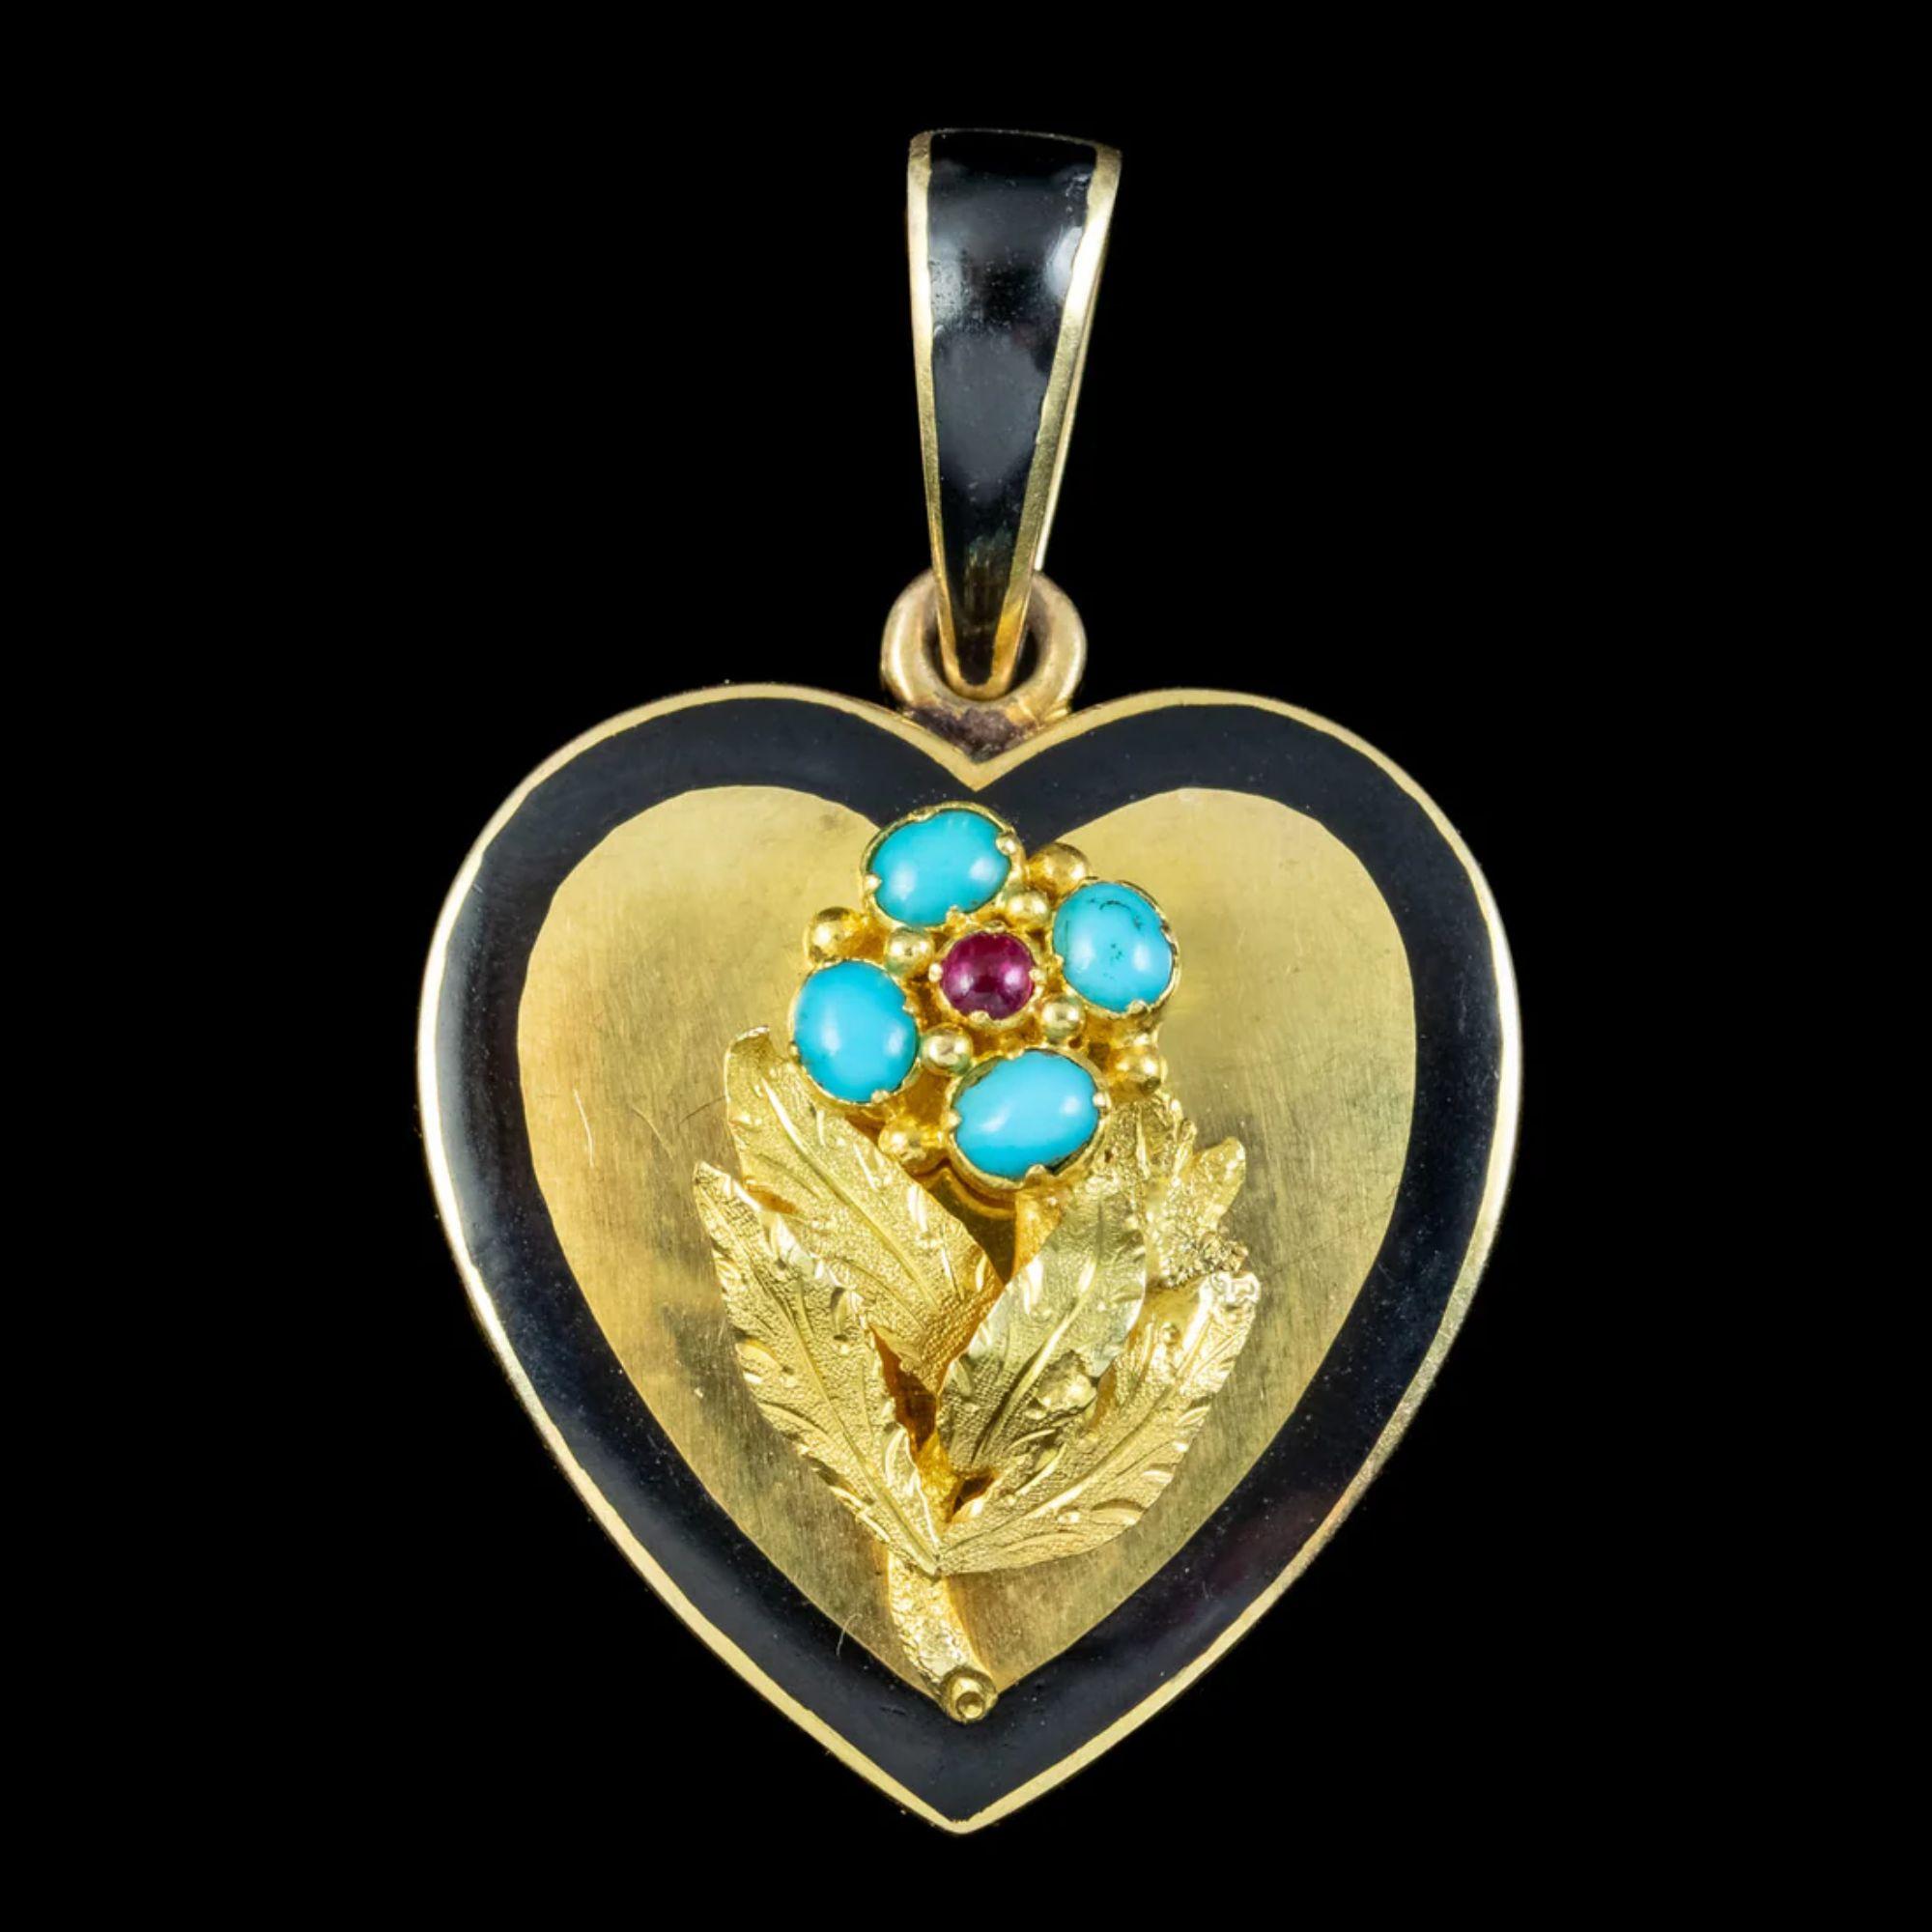 A sweet antique late Victorian heart pendant featuring a high relief forget me not in the centre topped with four turquoise petals and a cabochon ruby in the centre.

Turquoise is considered a stone of good fortune and has long been associated with